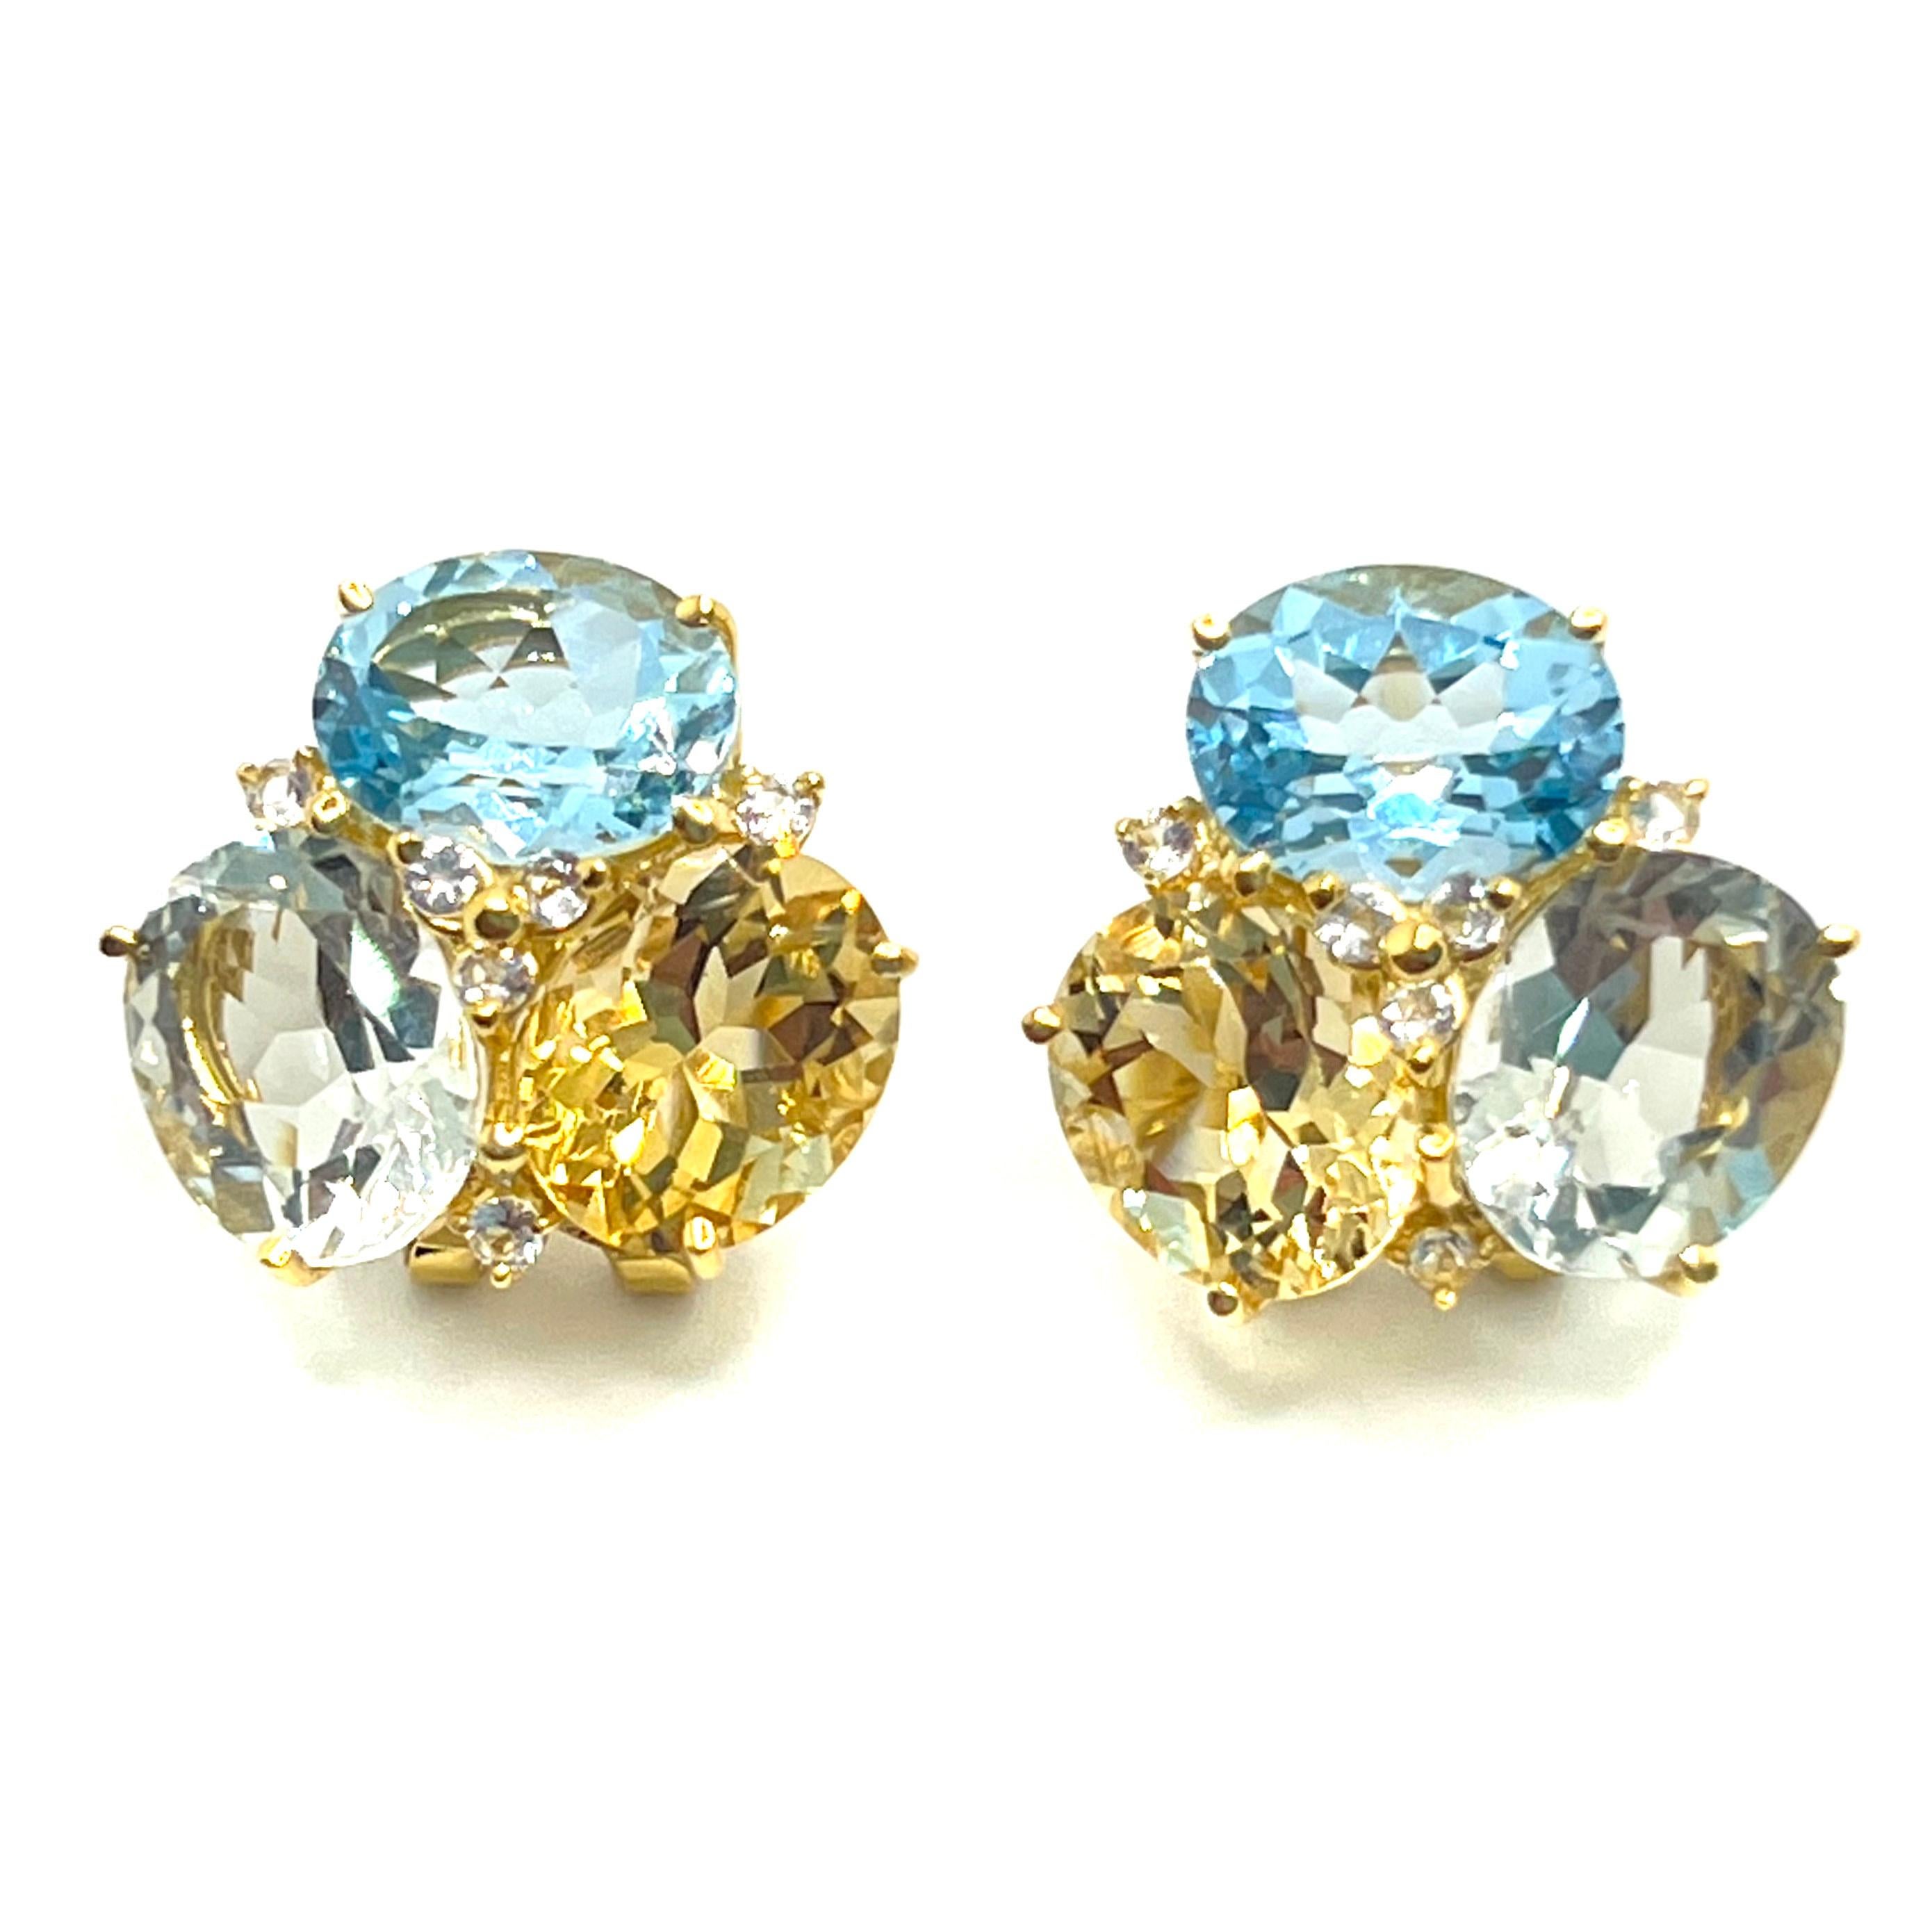 These stunning pair of earrings feature sets of oval genuine blue topaz, citrine, prasiolite adorned with round white topaz, handset in 18k yellow gold vermeil over sterling silver. The vibrant color combination of three stones produce beautiful